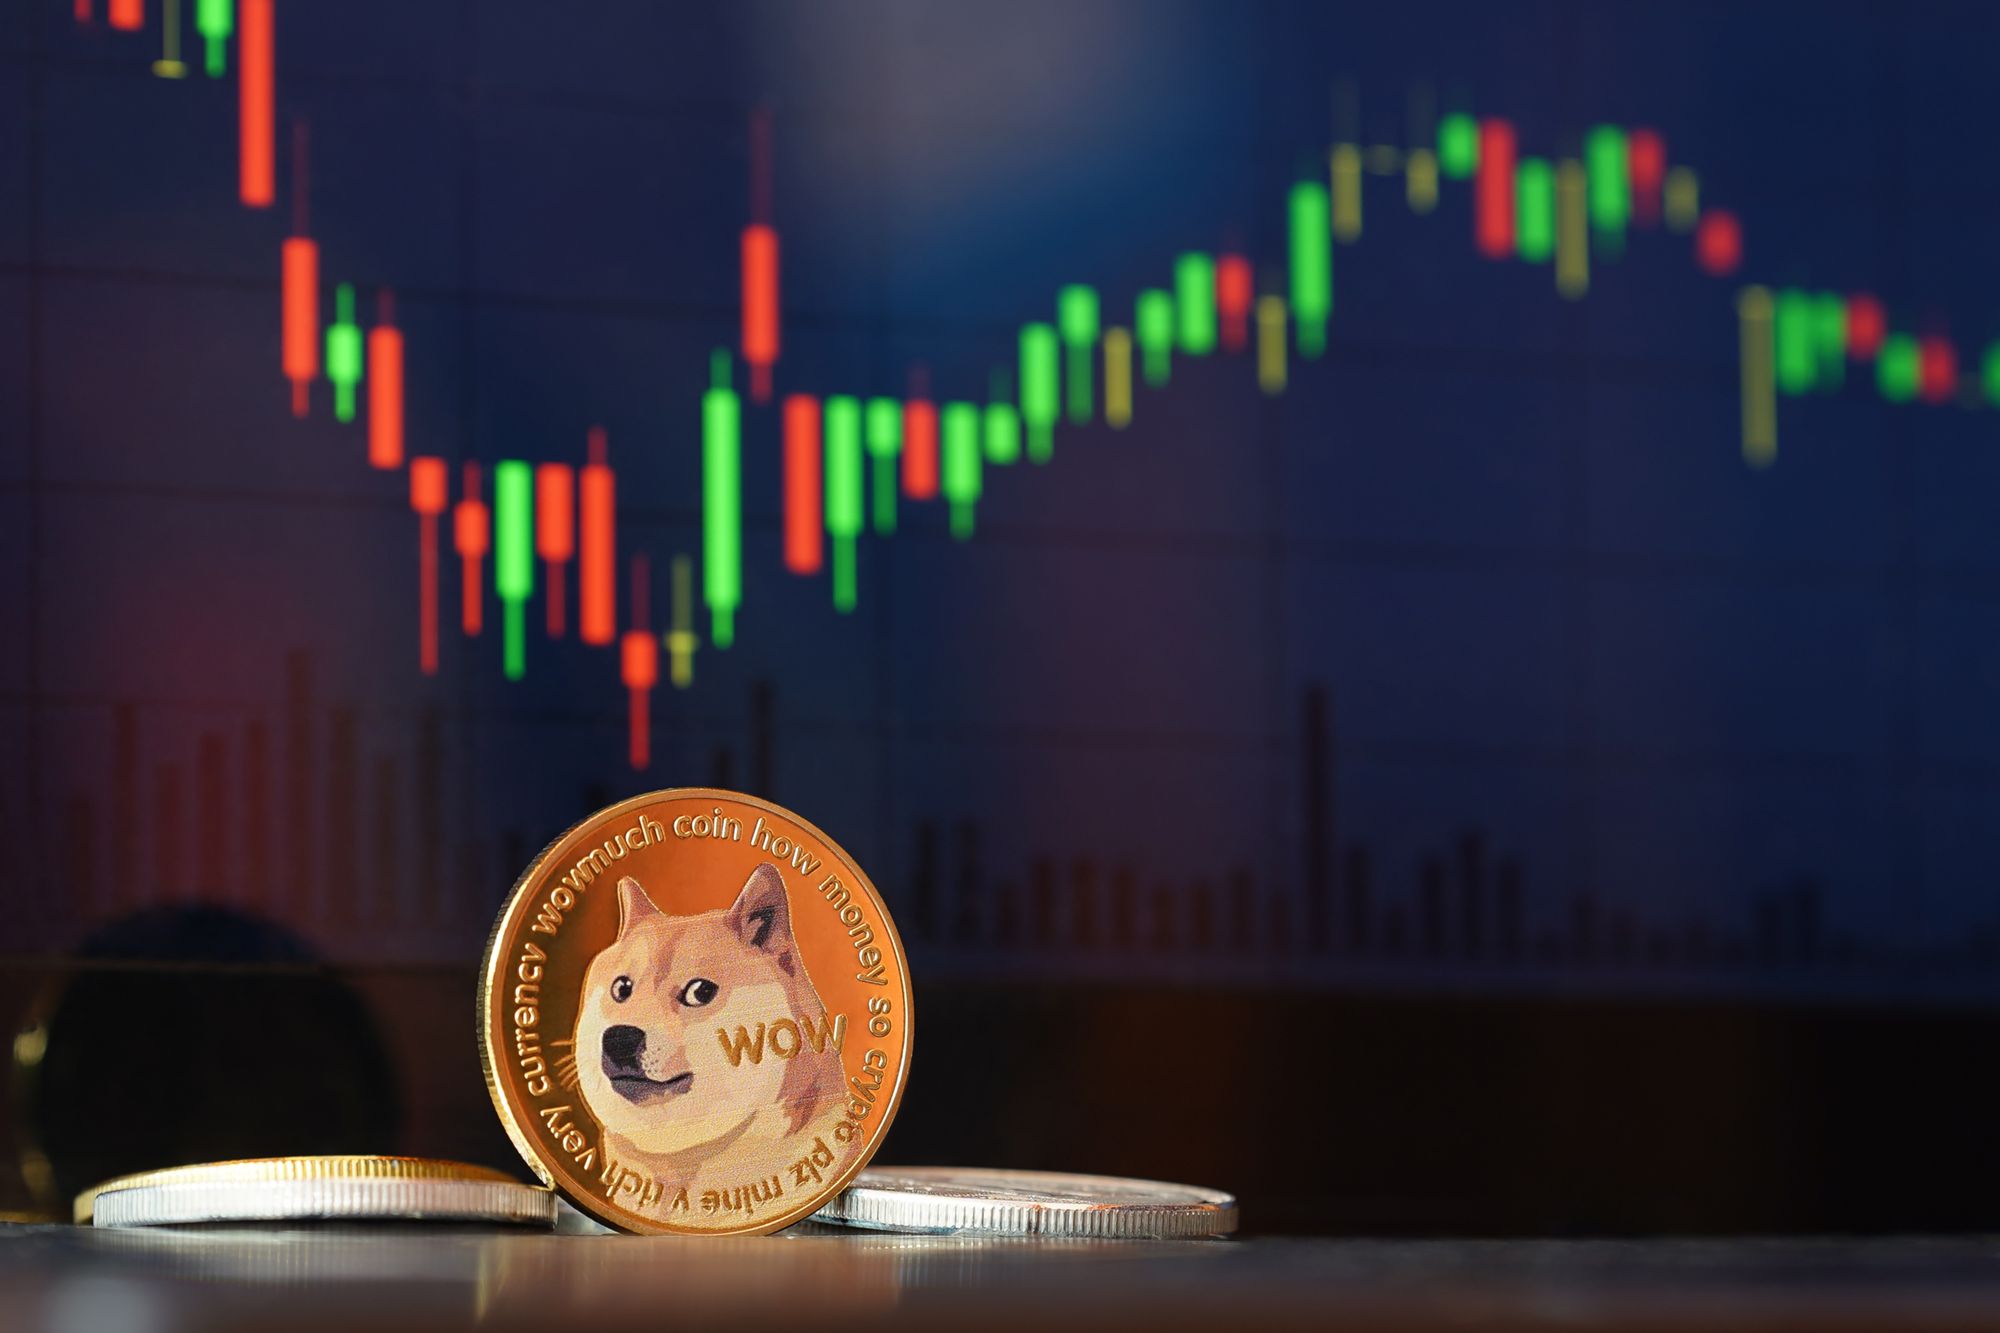 Dogecoin Price Skyrockets, Goes Back to 1,000 Millionaires